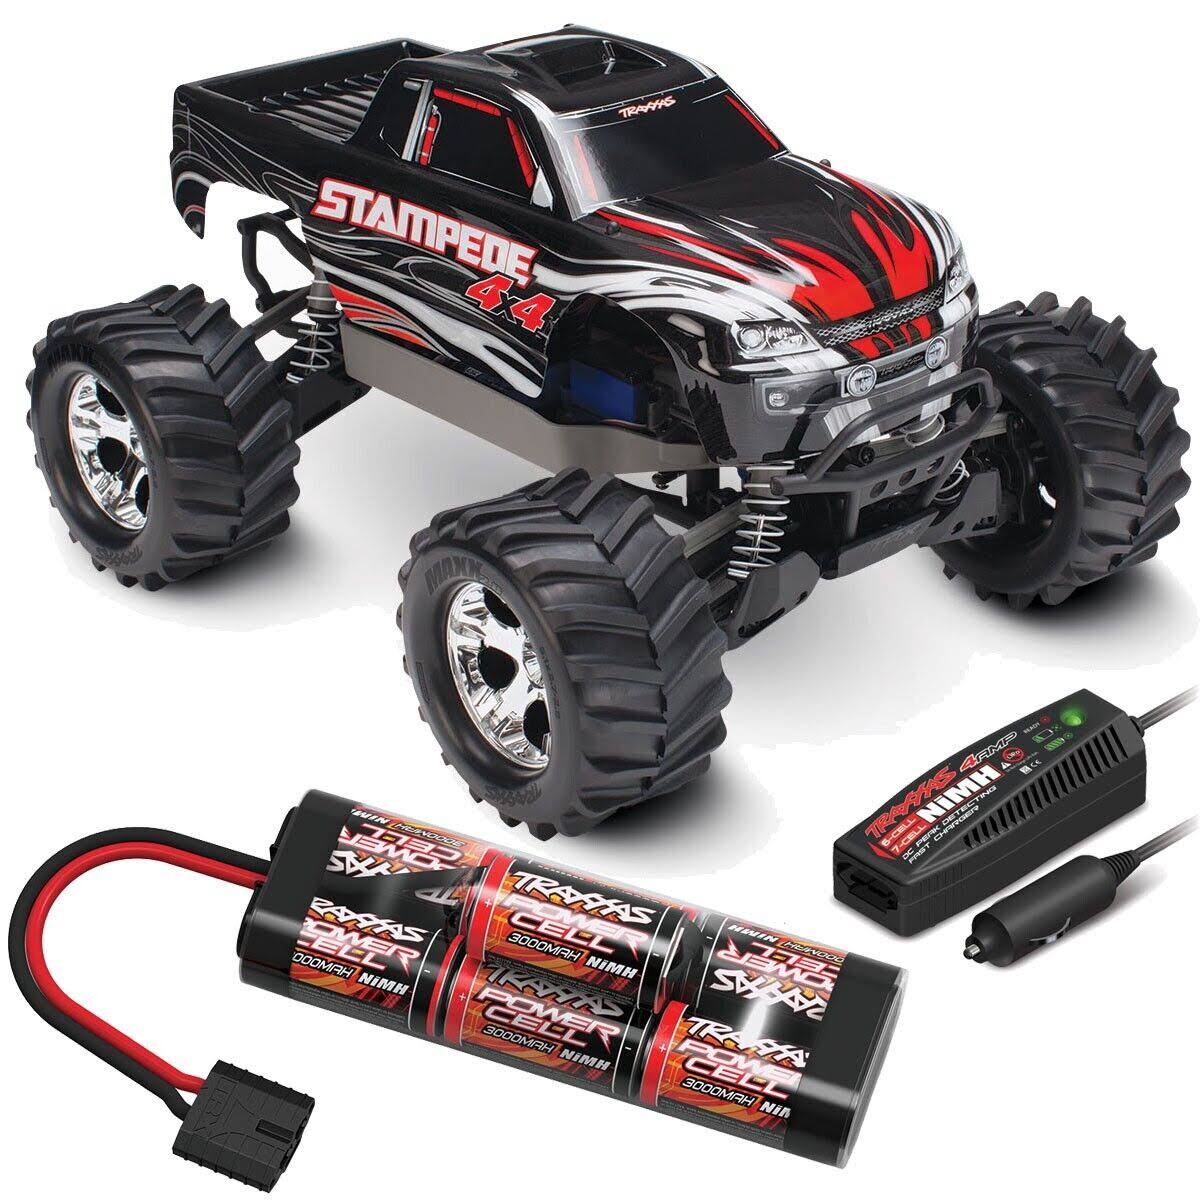 Traxxas TRA67054 Stampede 4x4 4wd Monster Truck - 1/10 Scale, With TQ 2.4GHZ Radio, Black